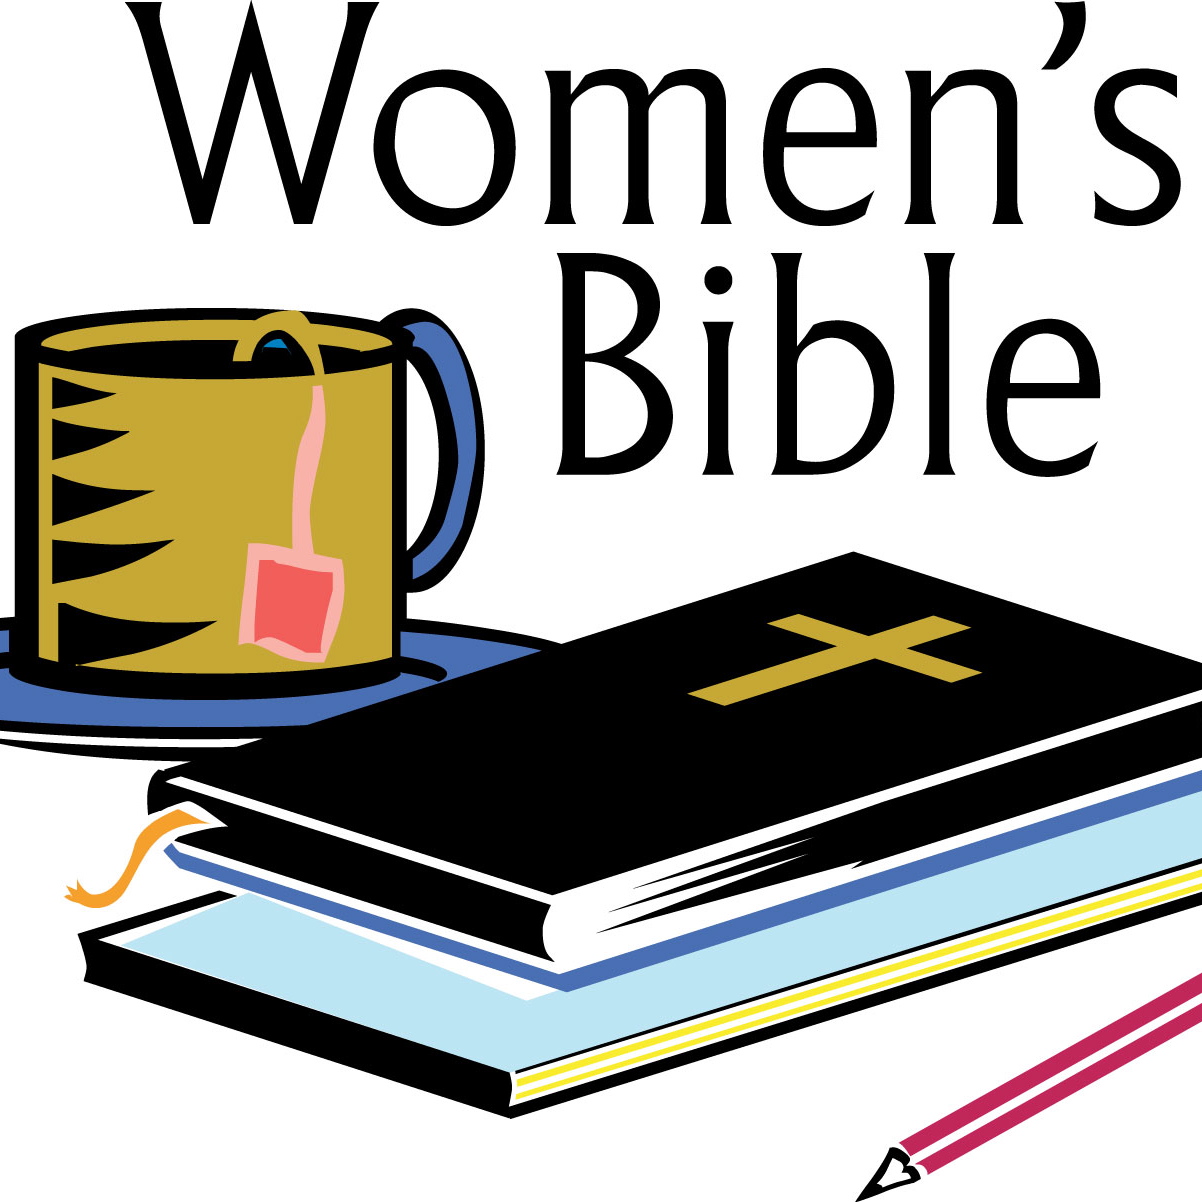 Image of bible study clipart 3 reading bible clip art - Cliparting.com